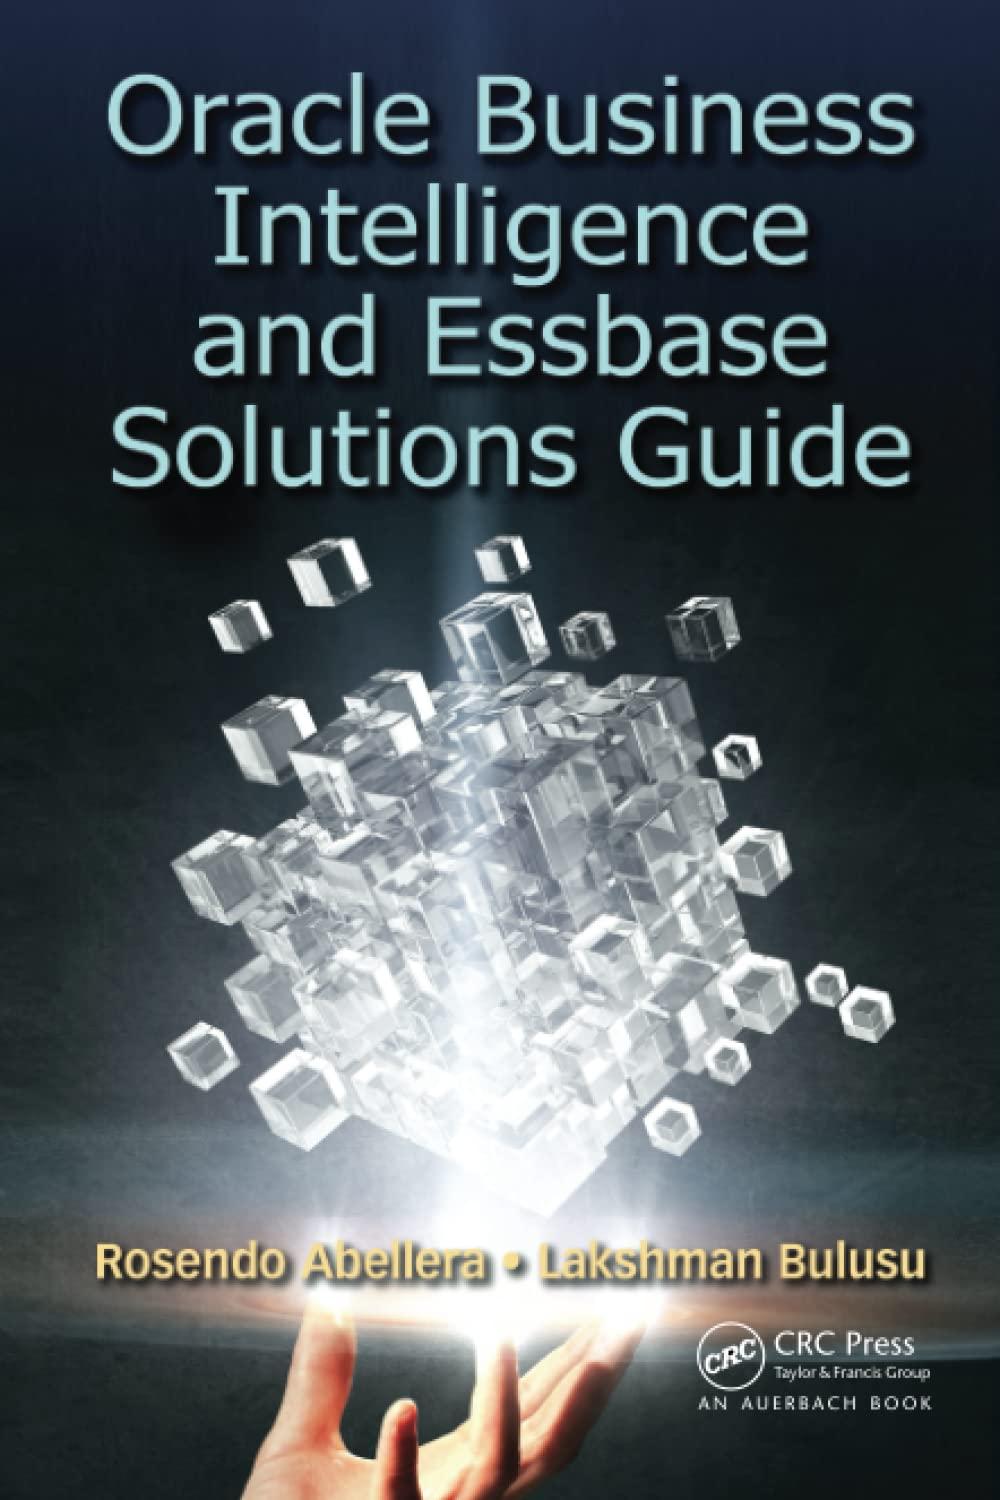 Oracle Business Intelligence And Essbase Solutions Guide